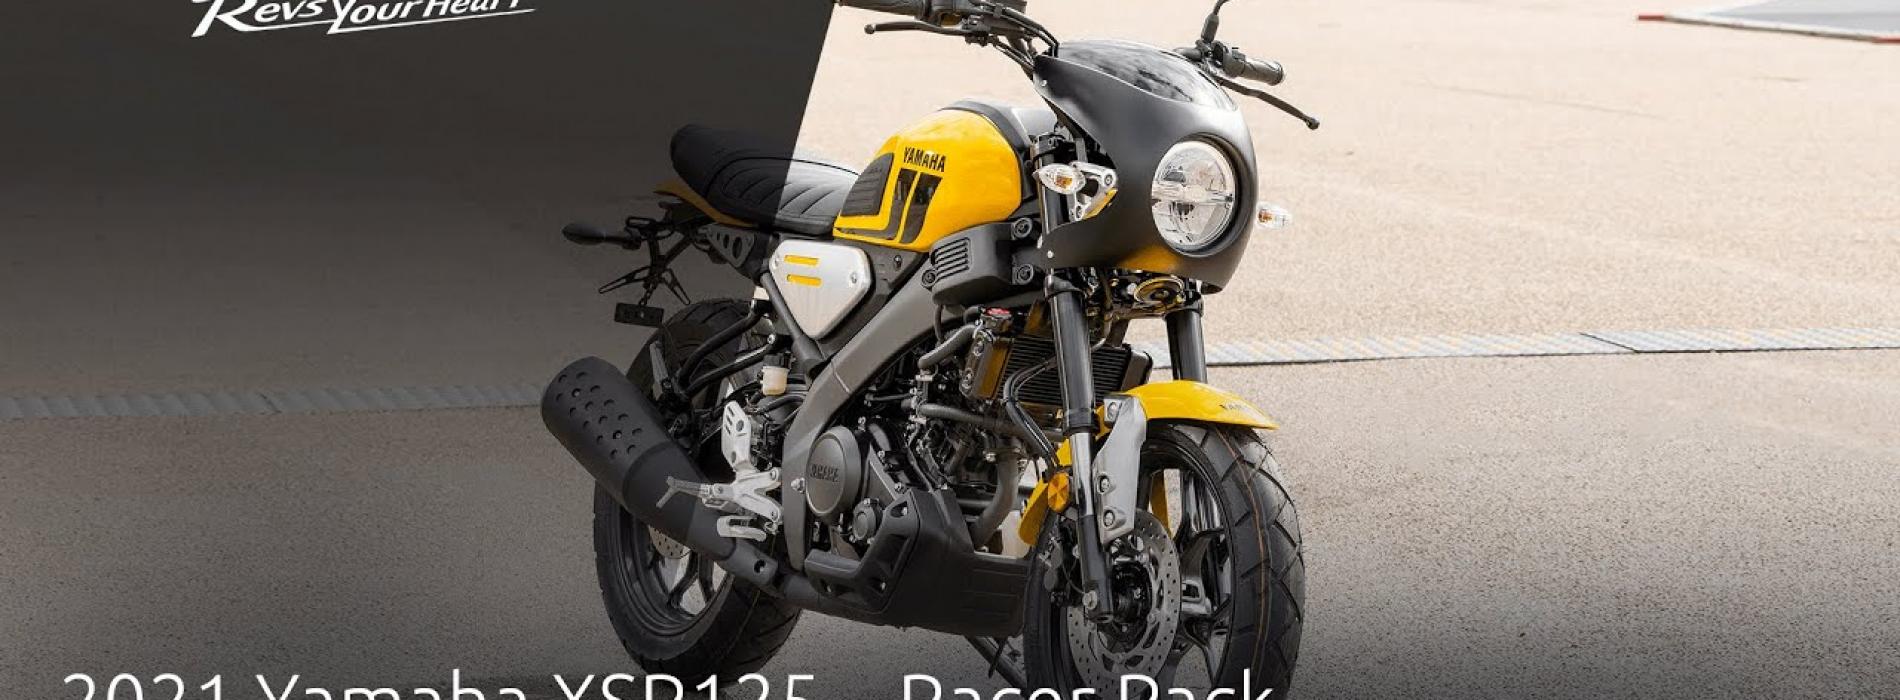 Yamaha XSR125 Racer Pack (Video Oficial)